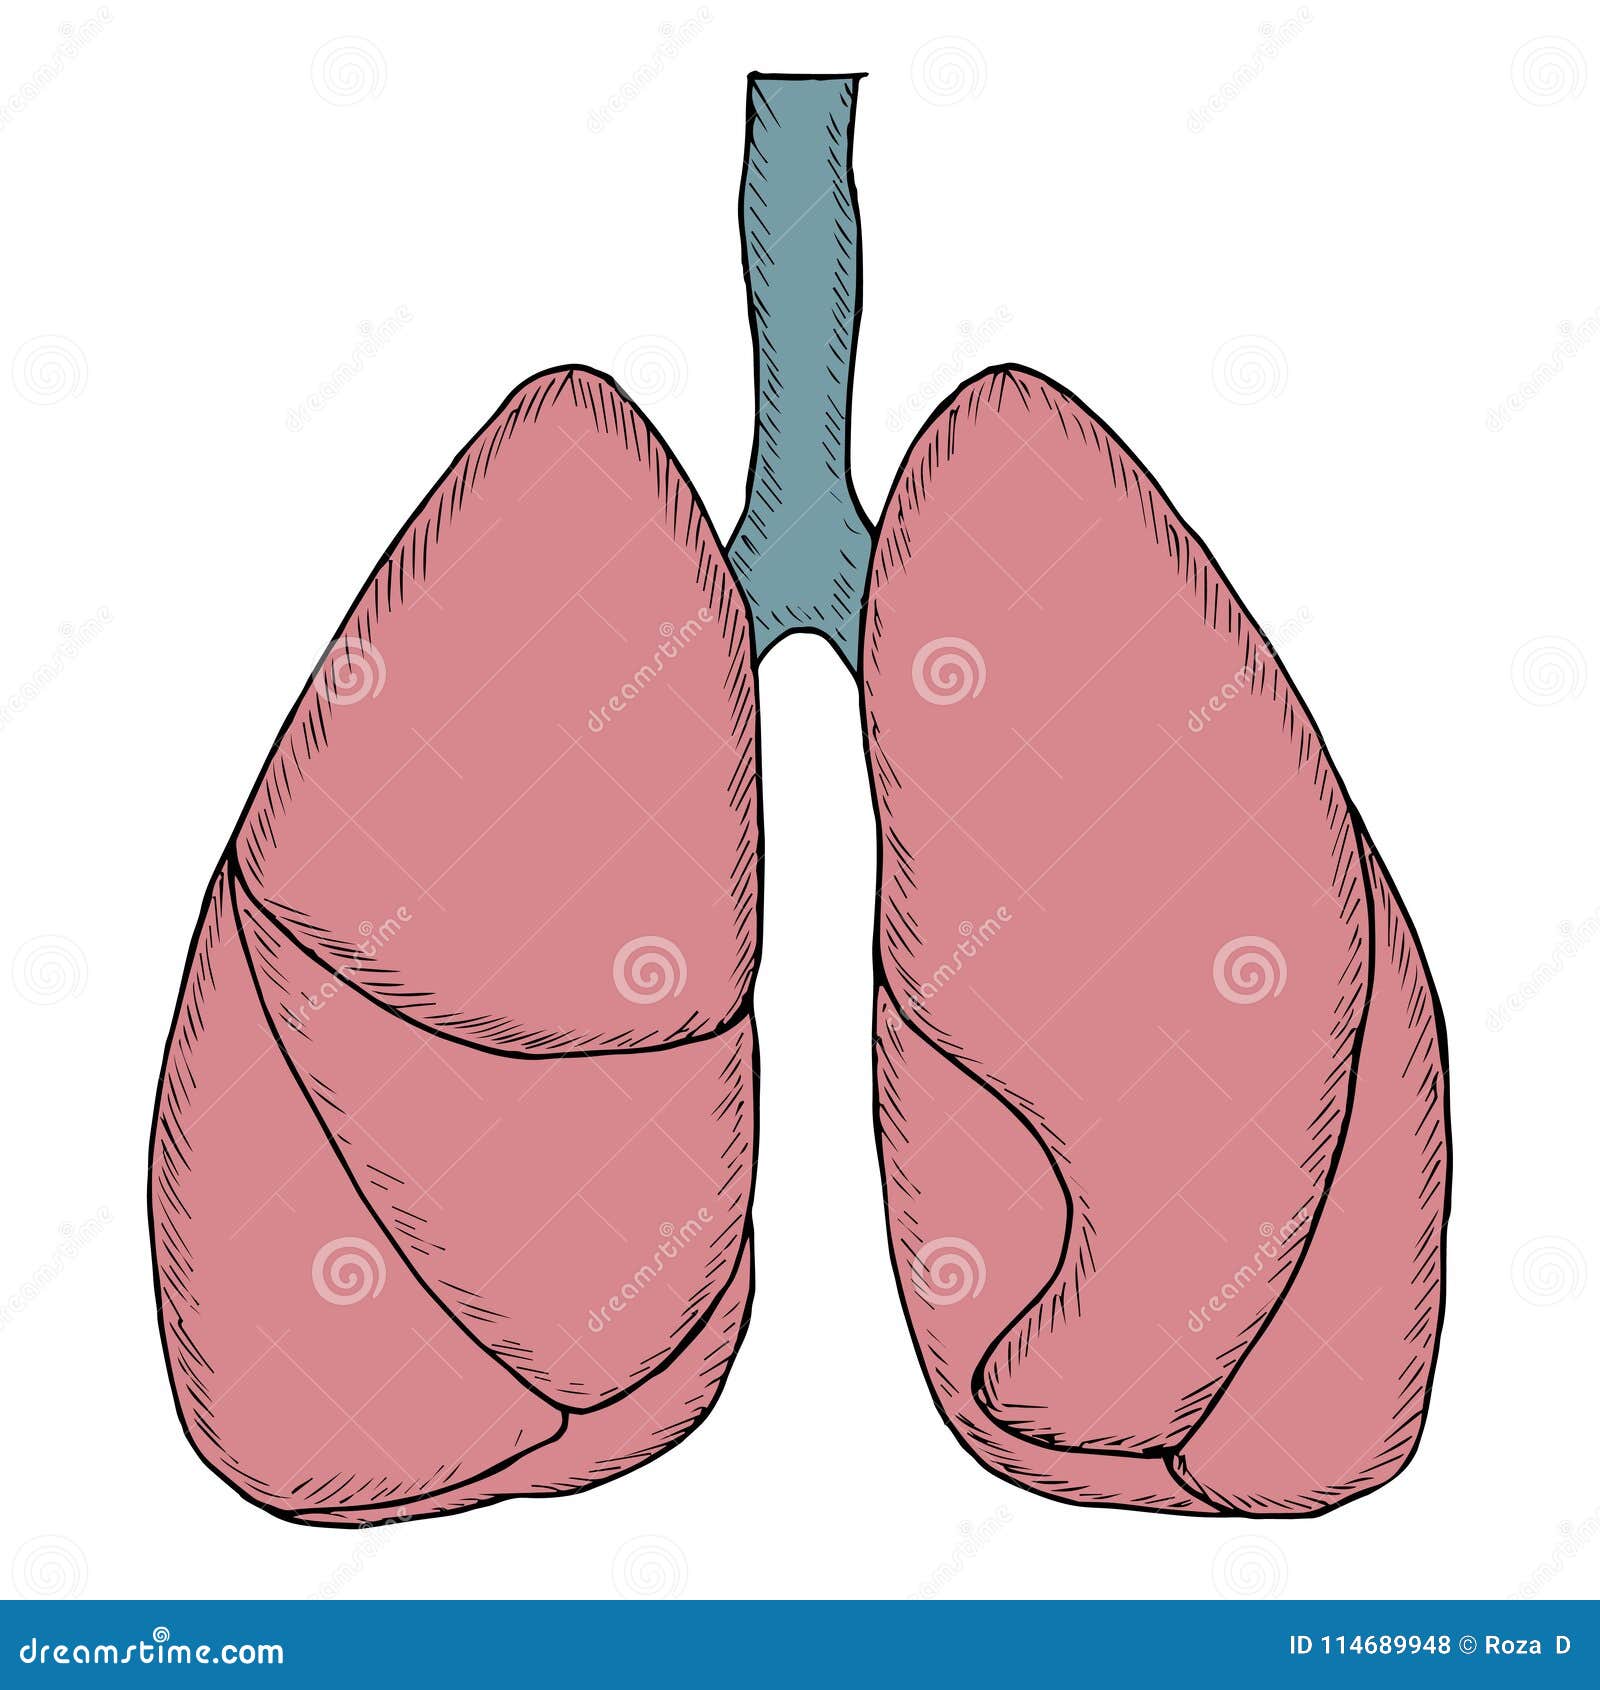 4,100+ Lung Drawing Stock Photos, Pictures & Royalty-Free Images - iStock |  Lungs, Lung sketch, Human lungs